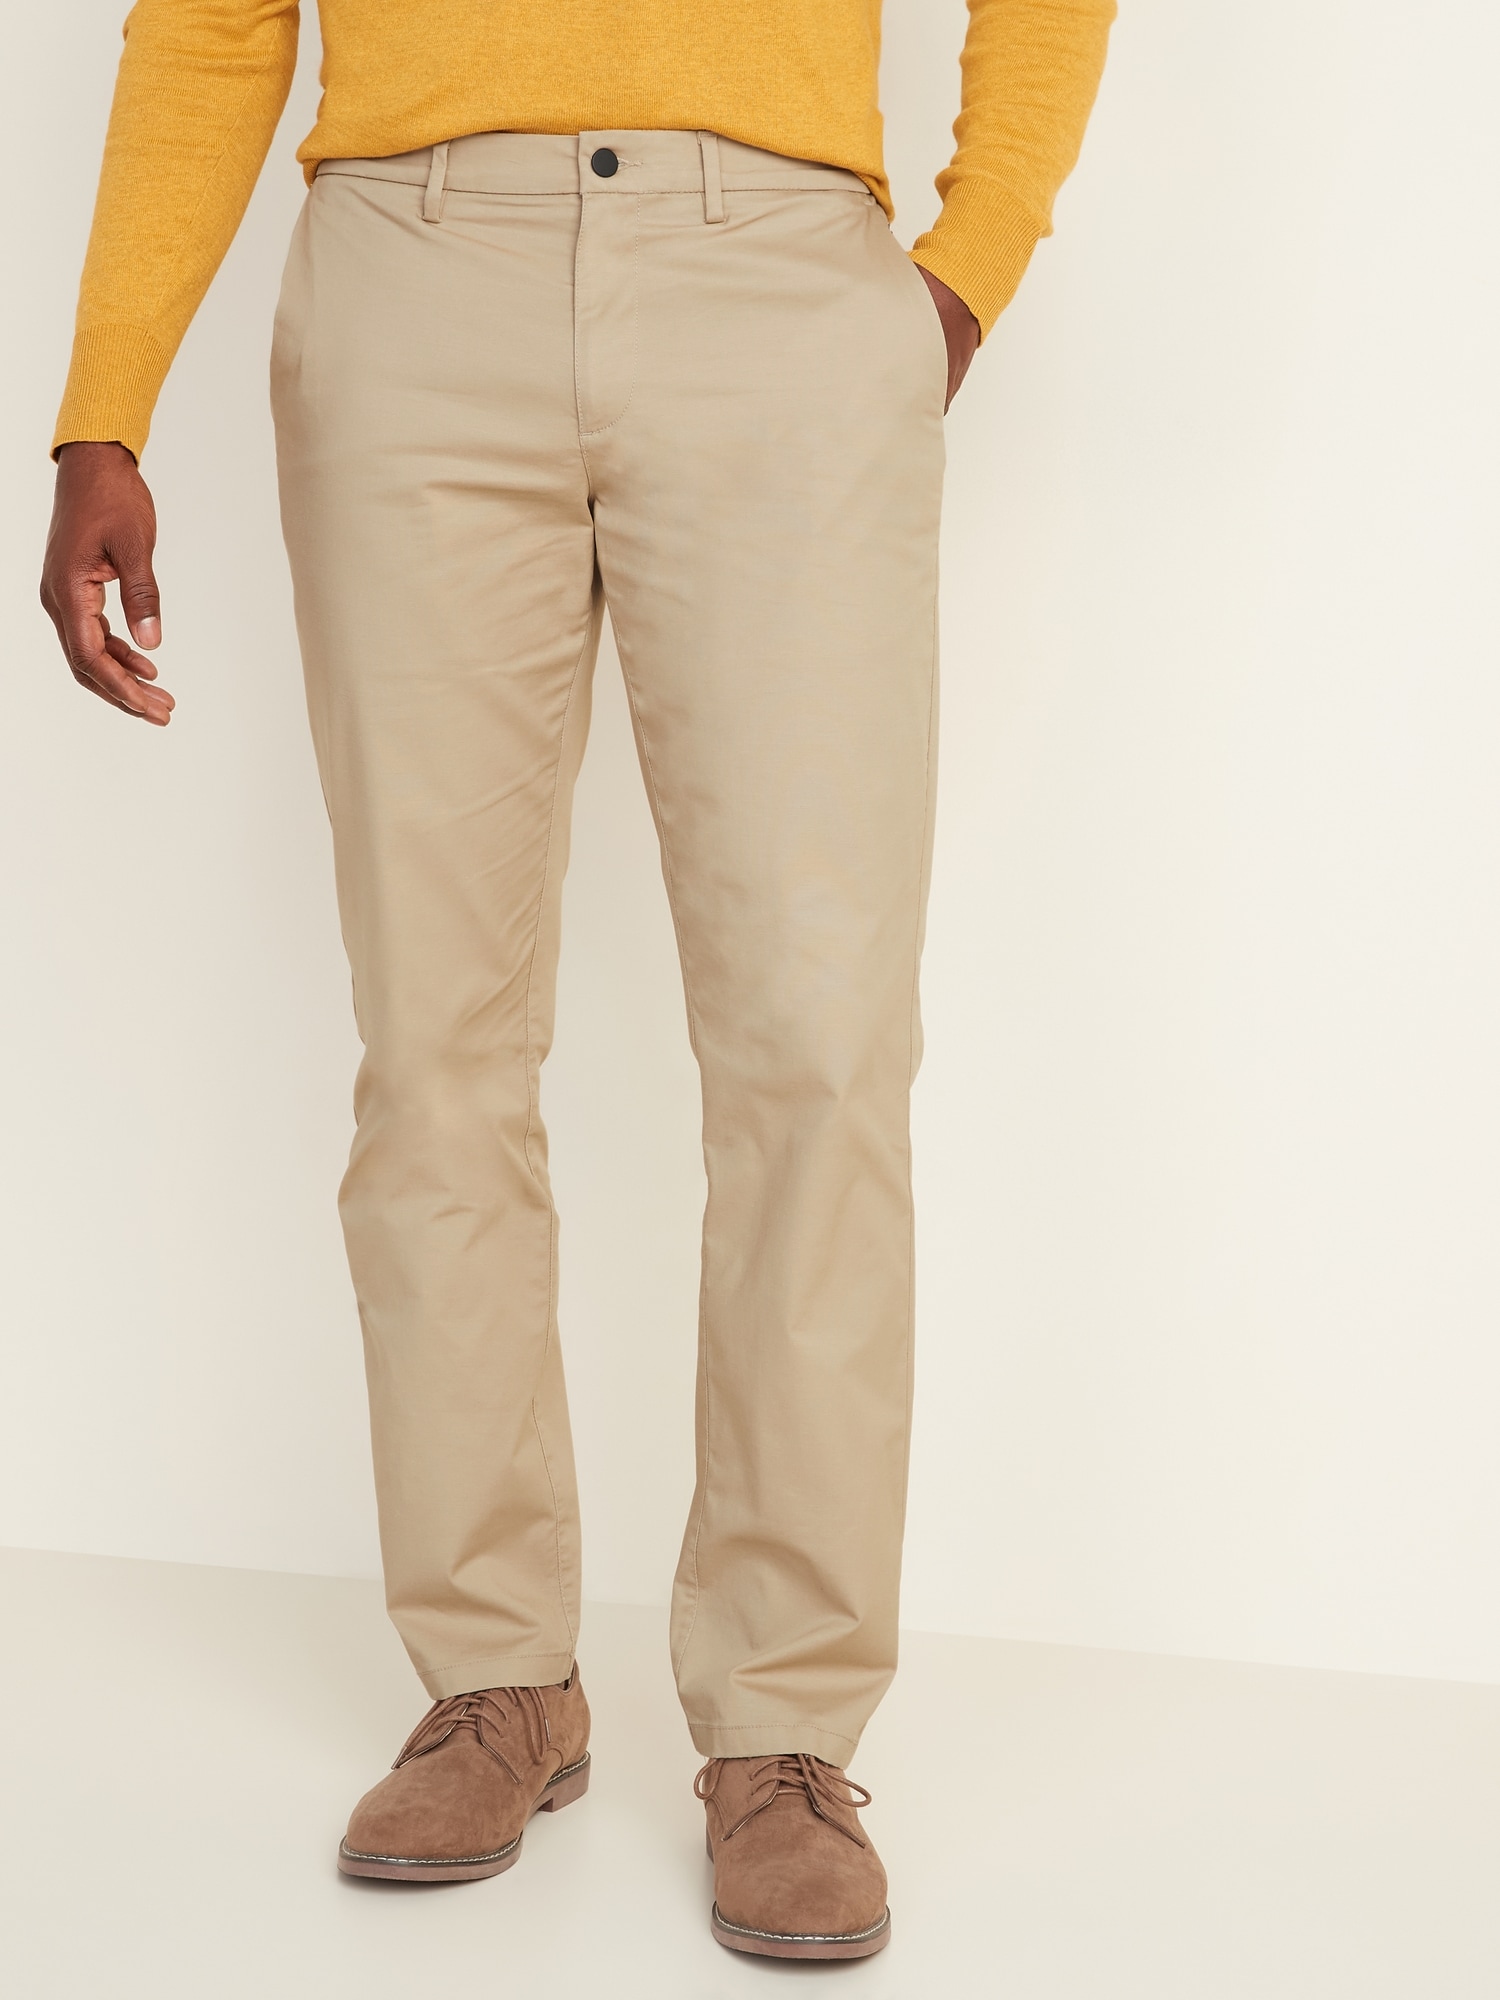 Slim Rotation LinenBlend Chino Pants for Men  Old Navy